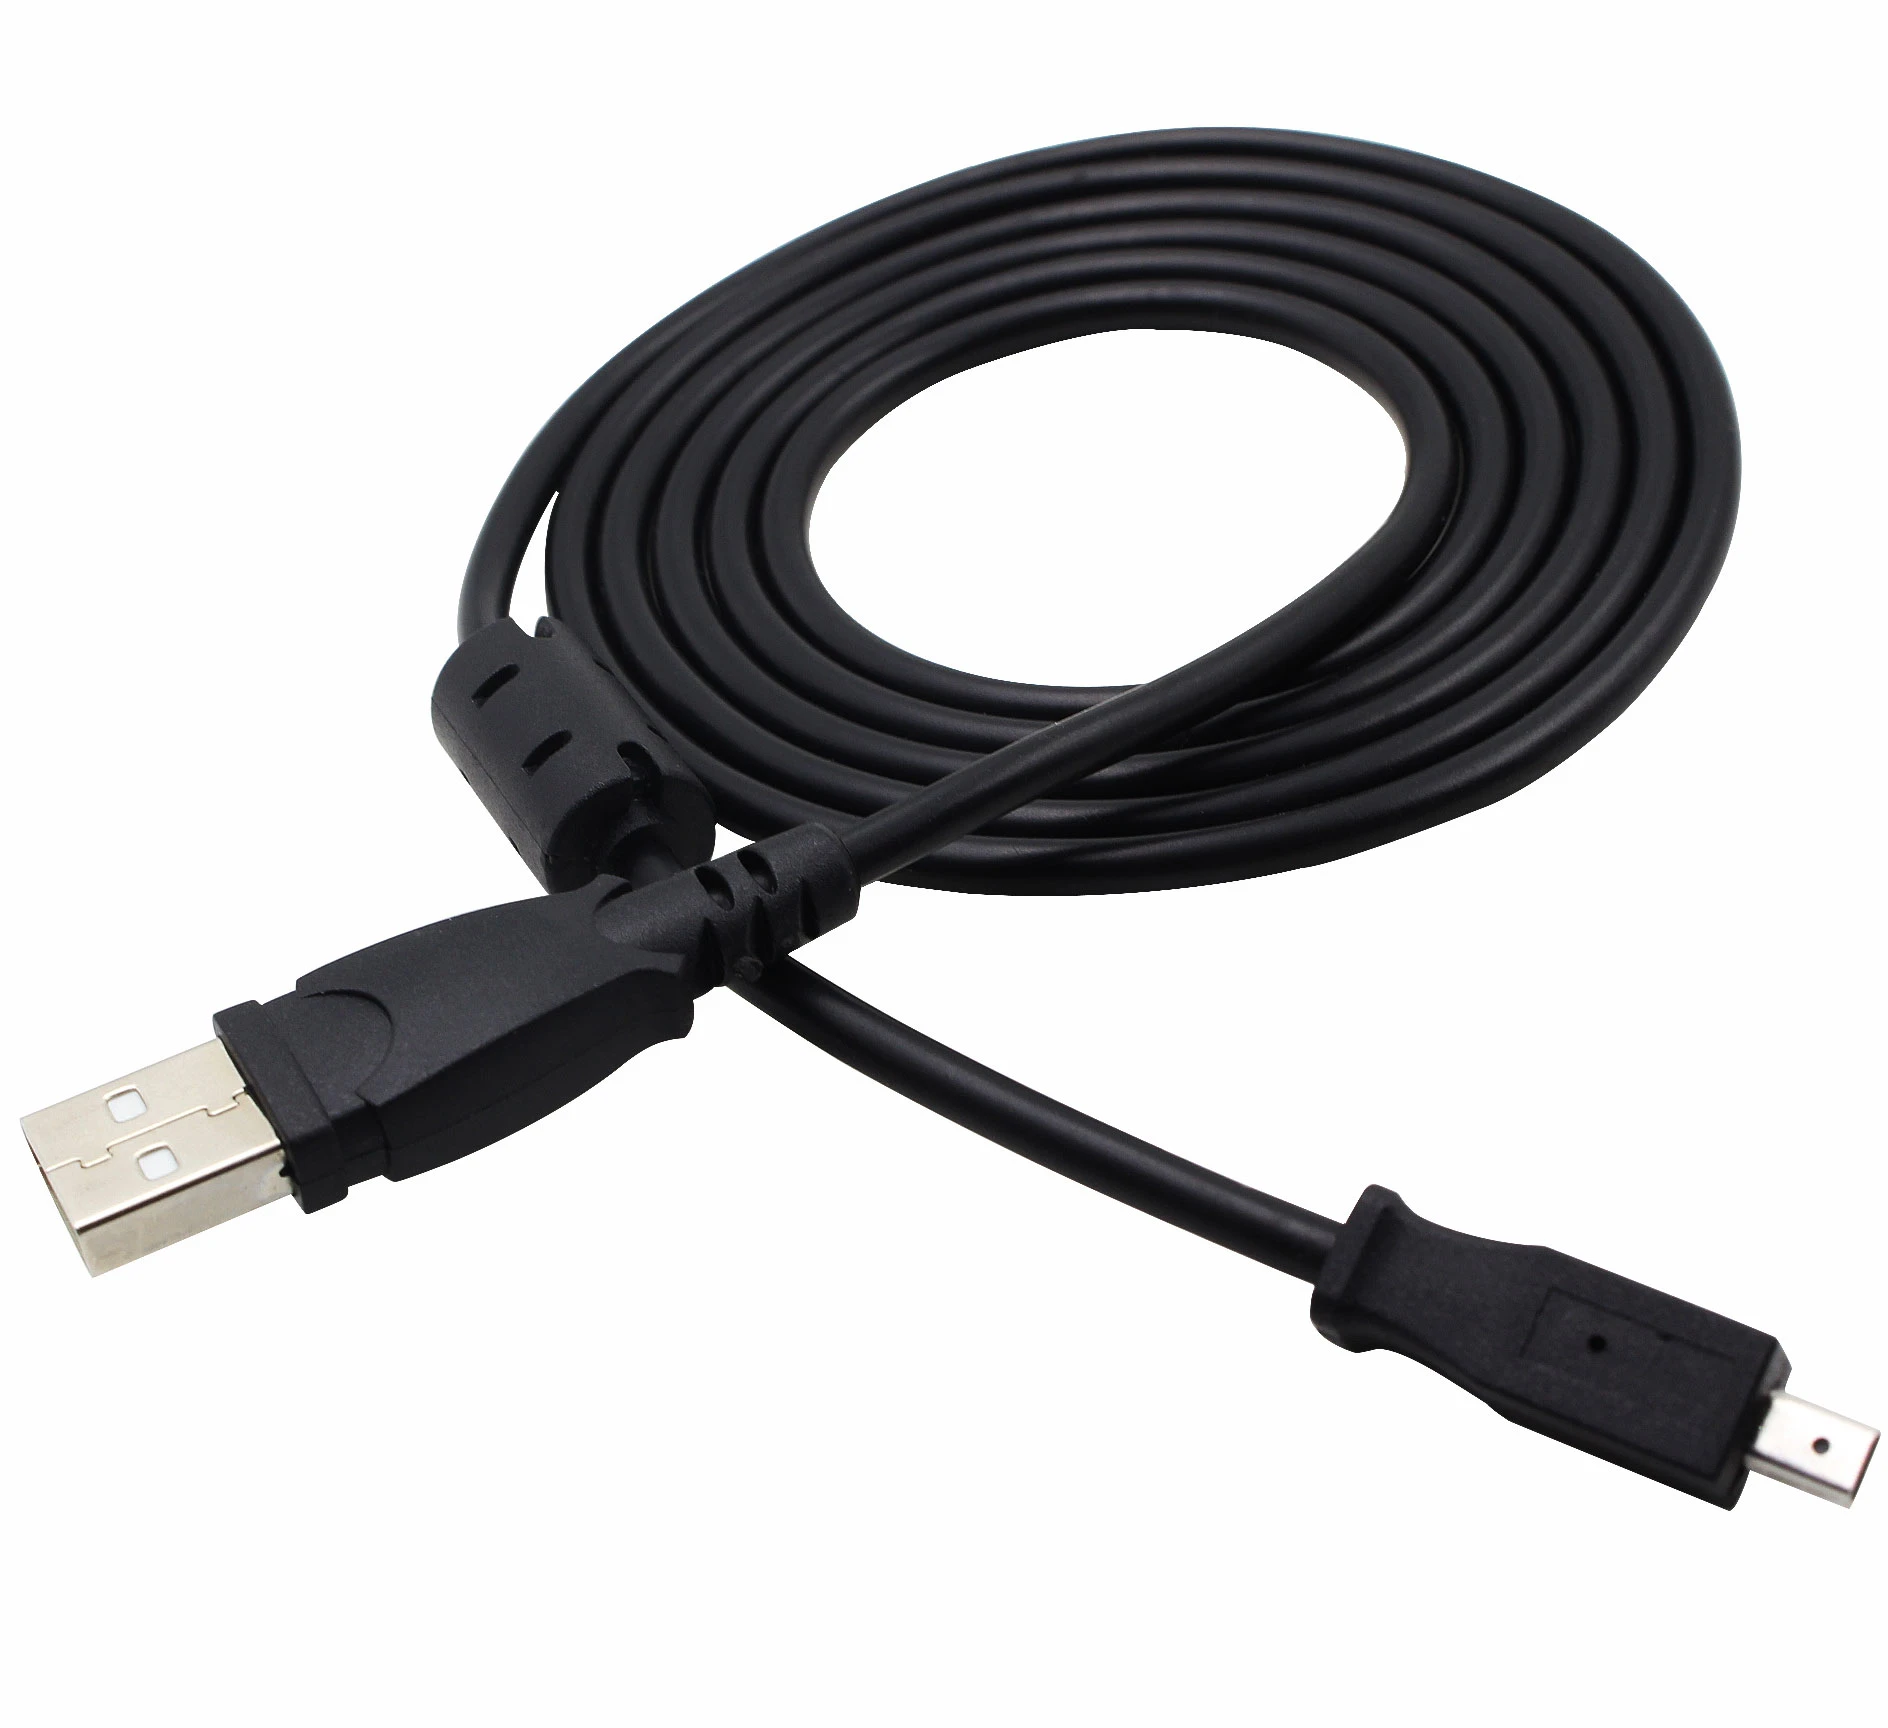 yan USB Battery Charger Data SYNC Cable Cord for Kodak Easyshare Touch M5370 Camera 